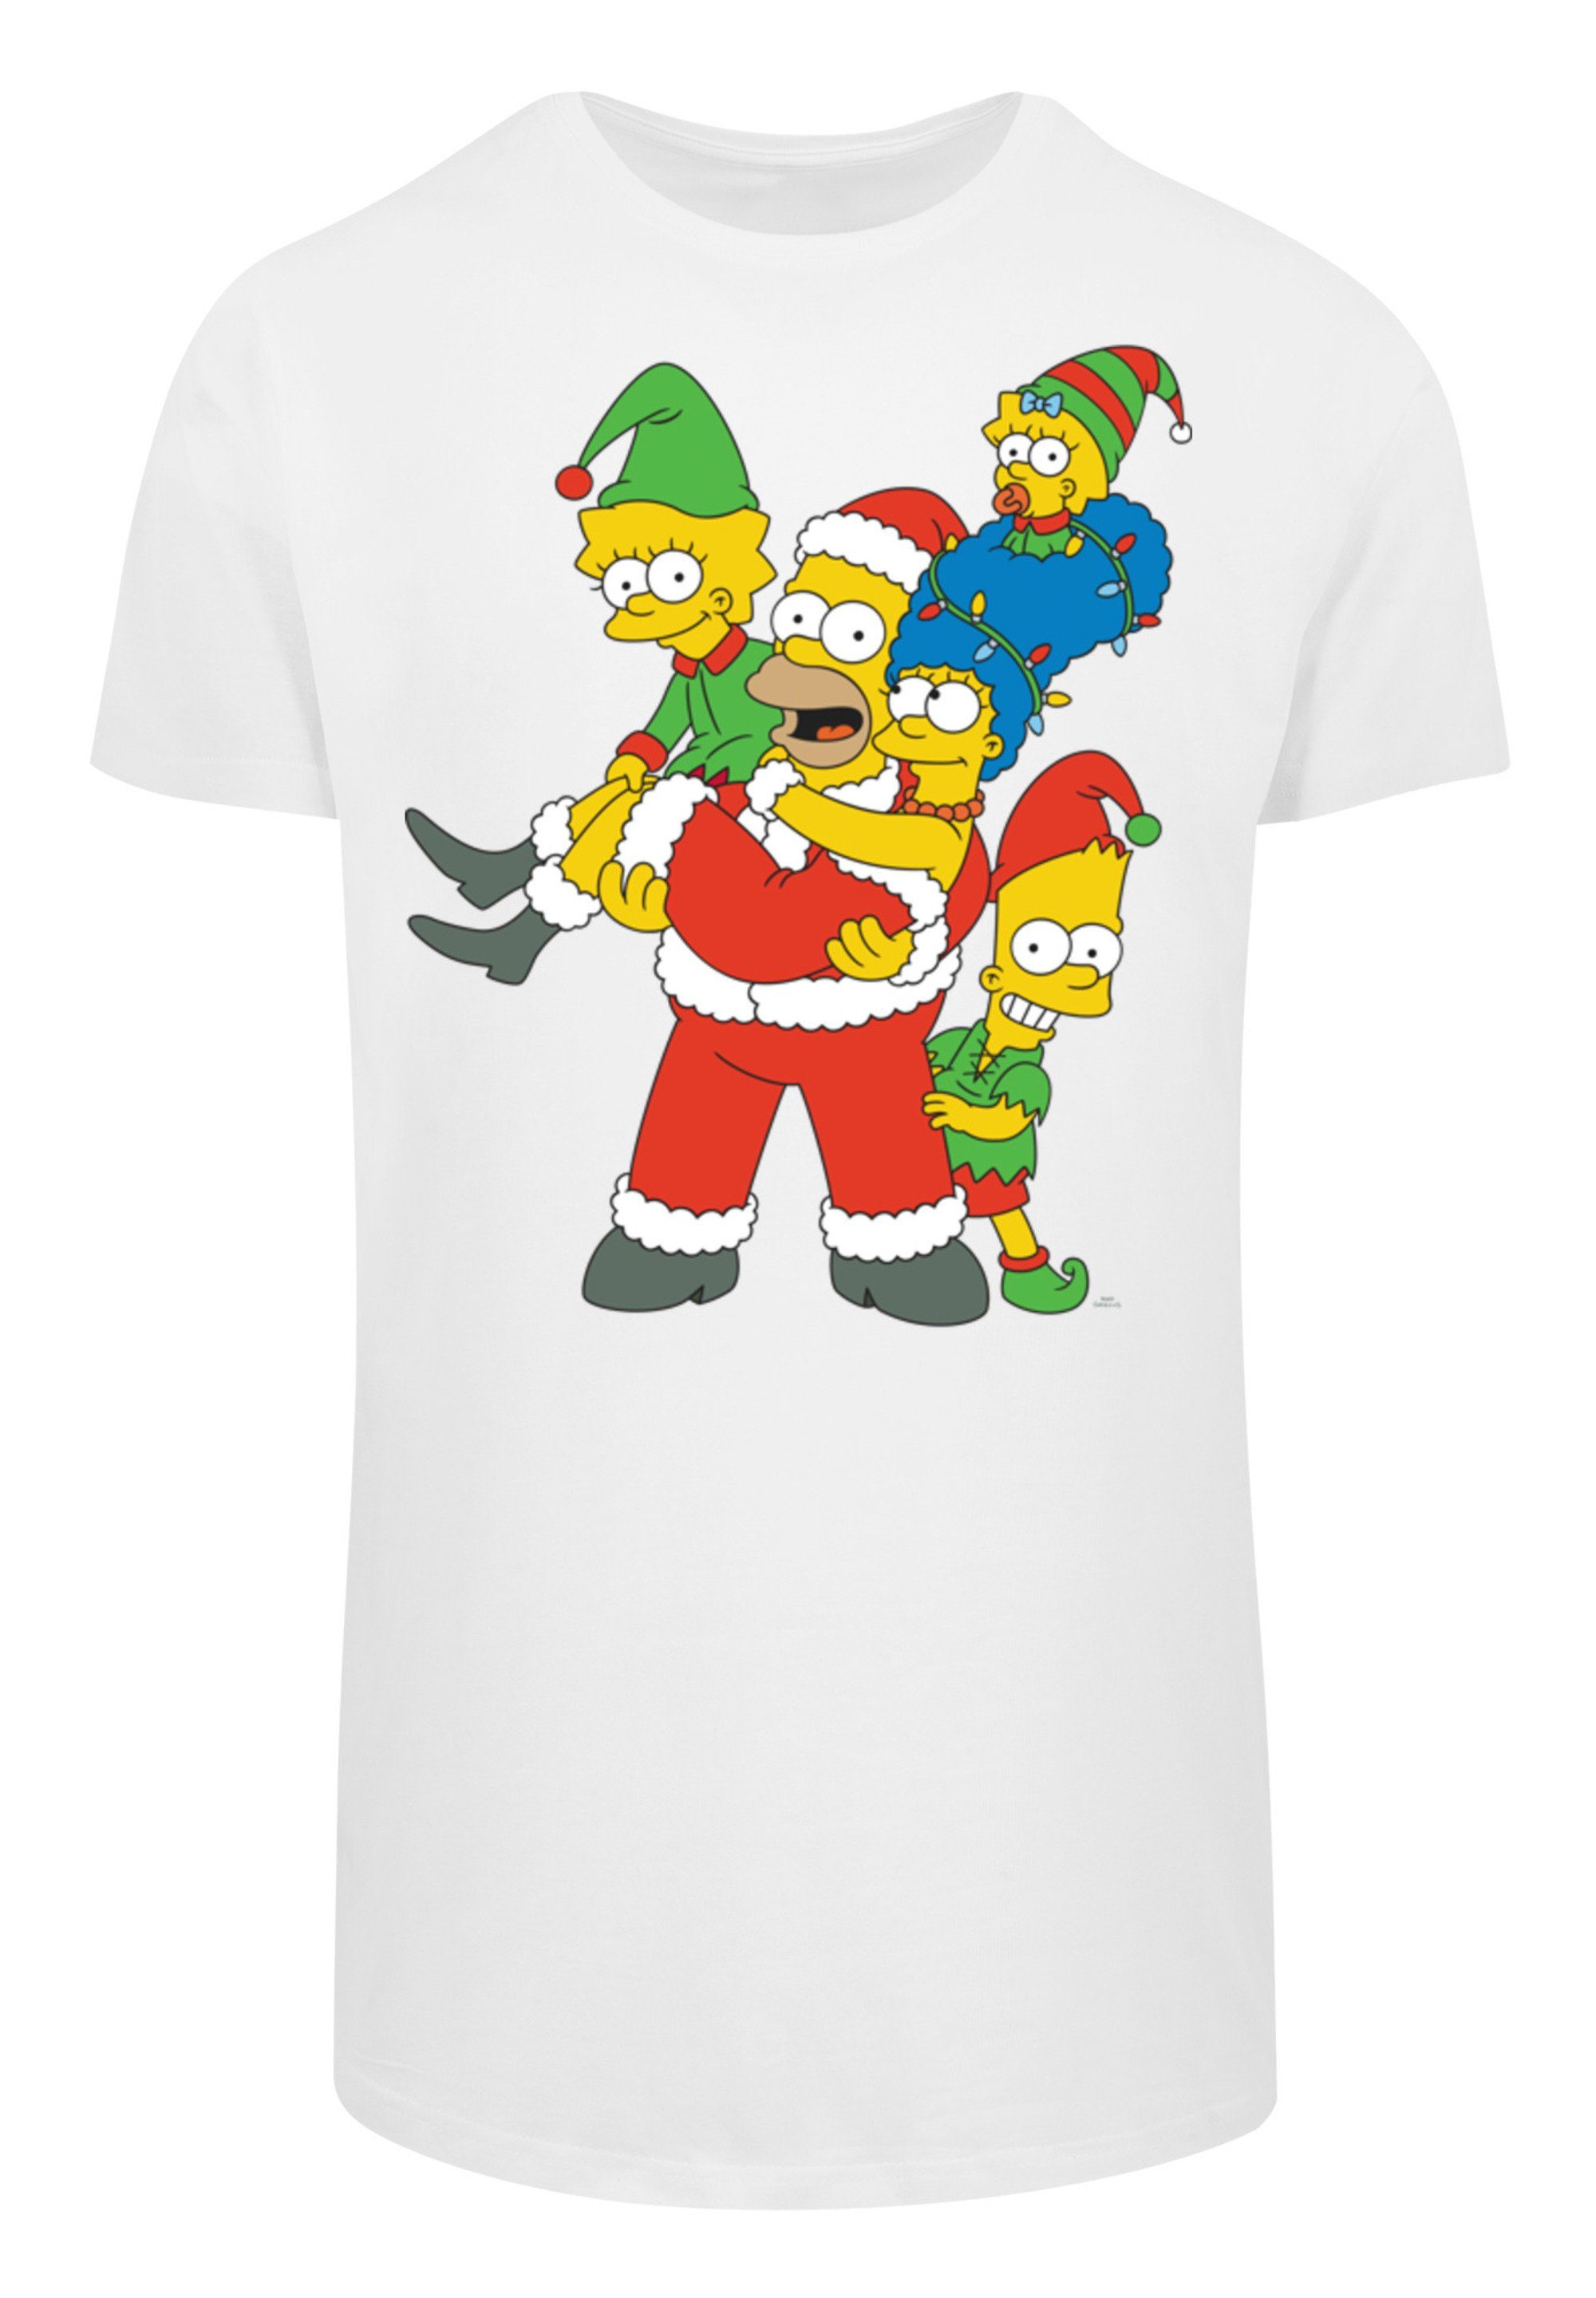 The Christmas Print Simpsons Weihnachten weiß T-Shirt F4NT4STIC Family